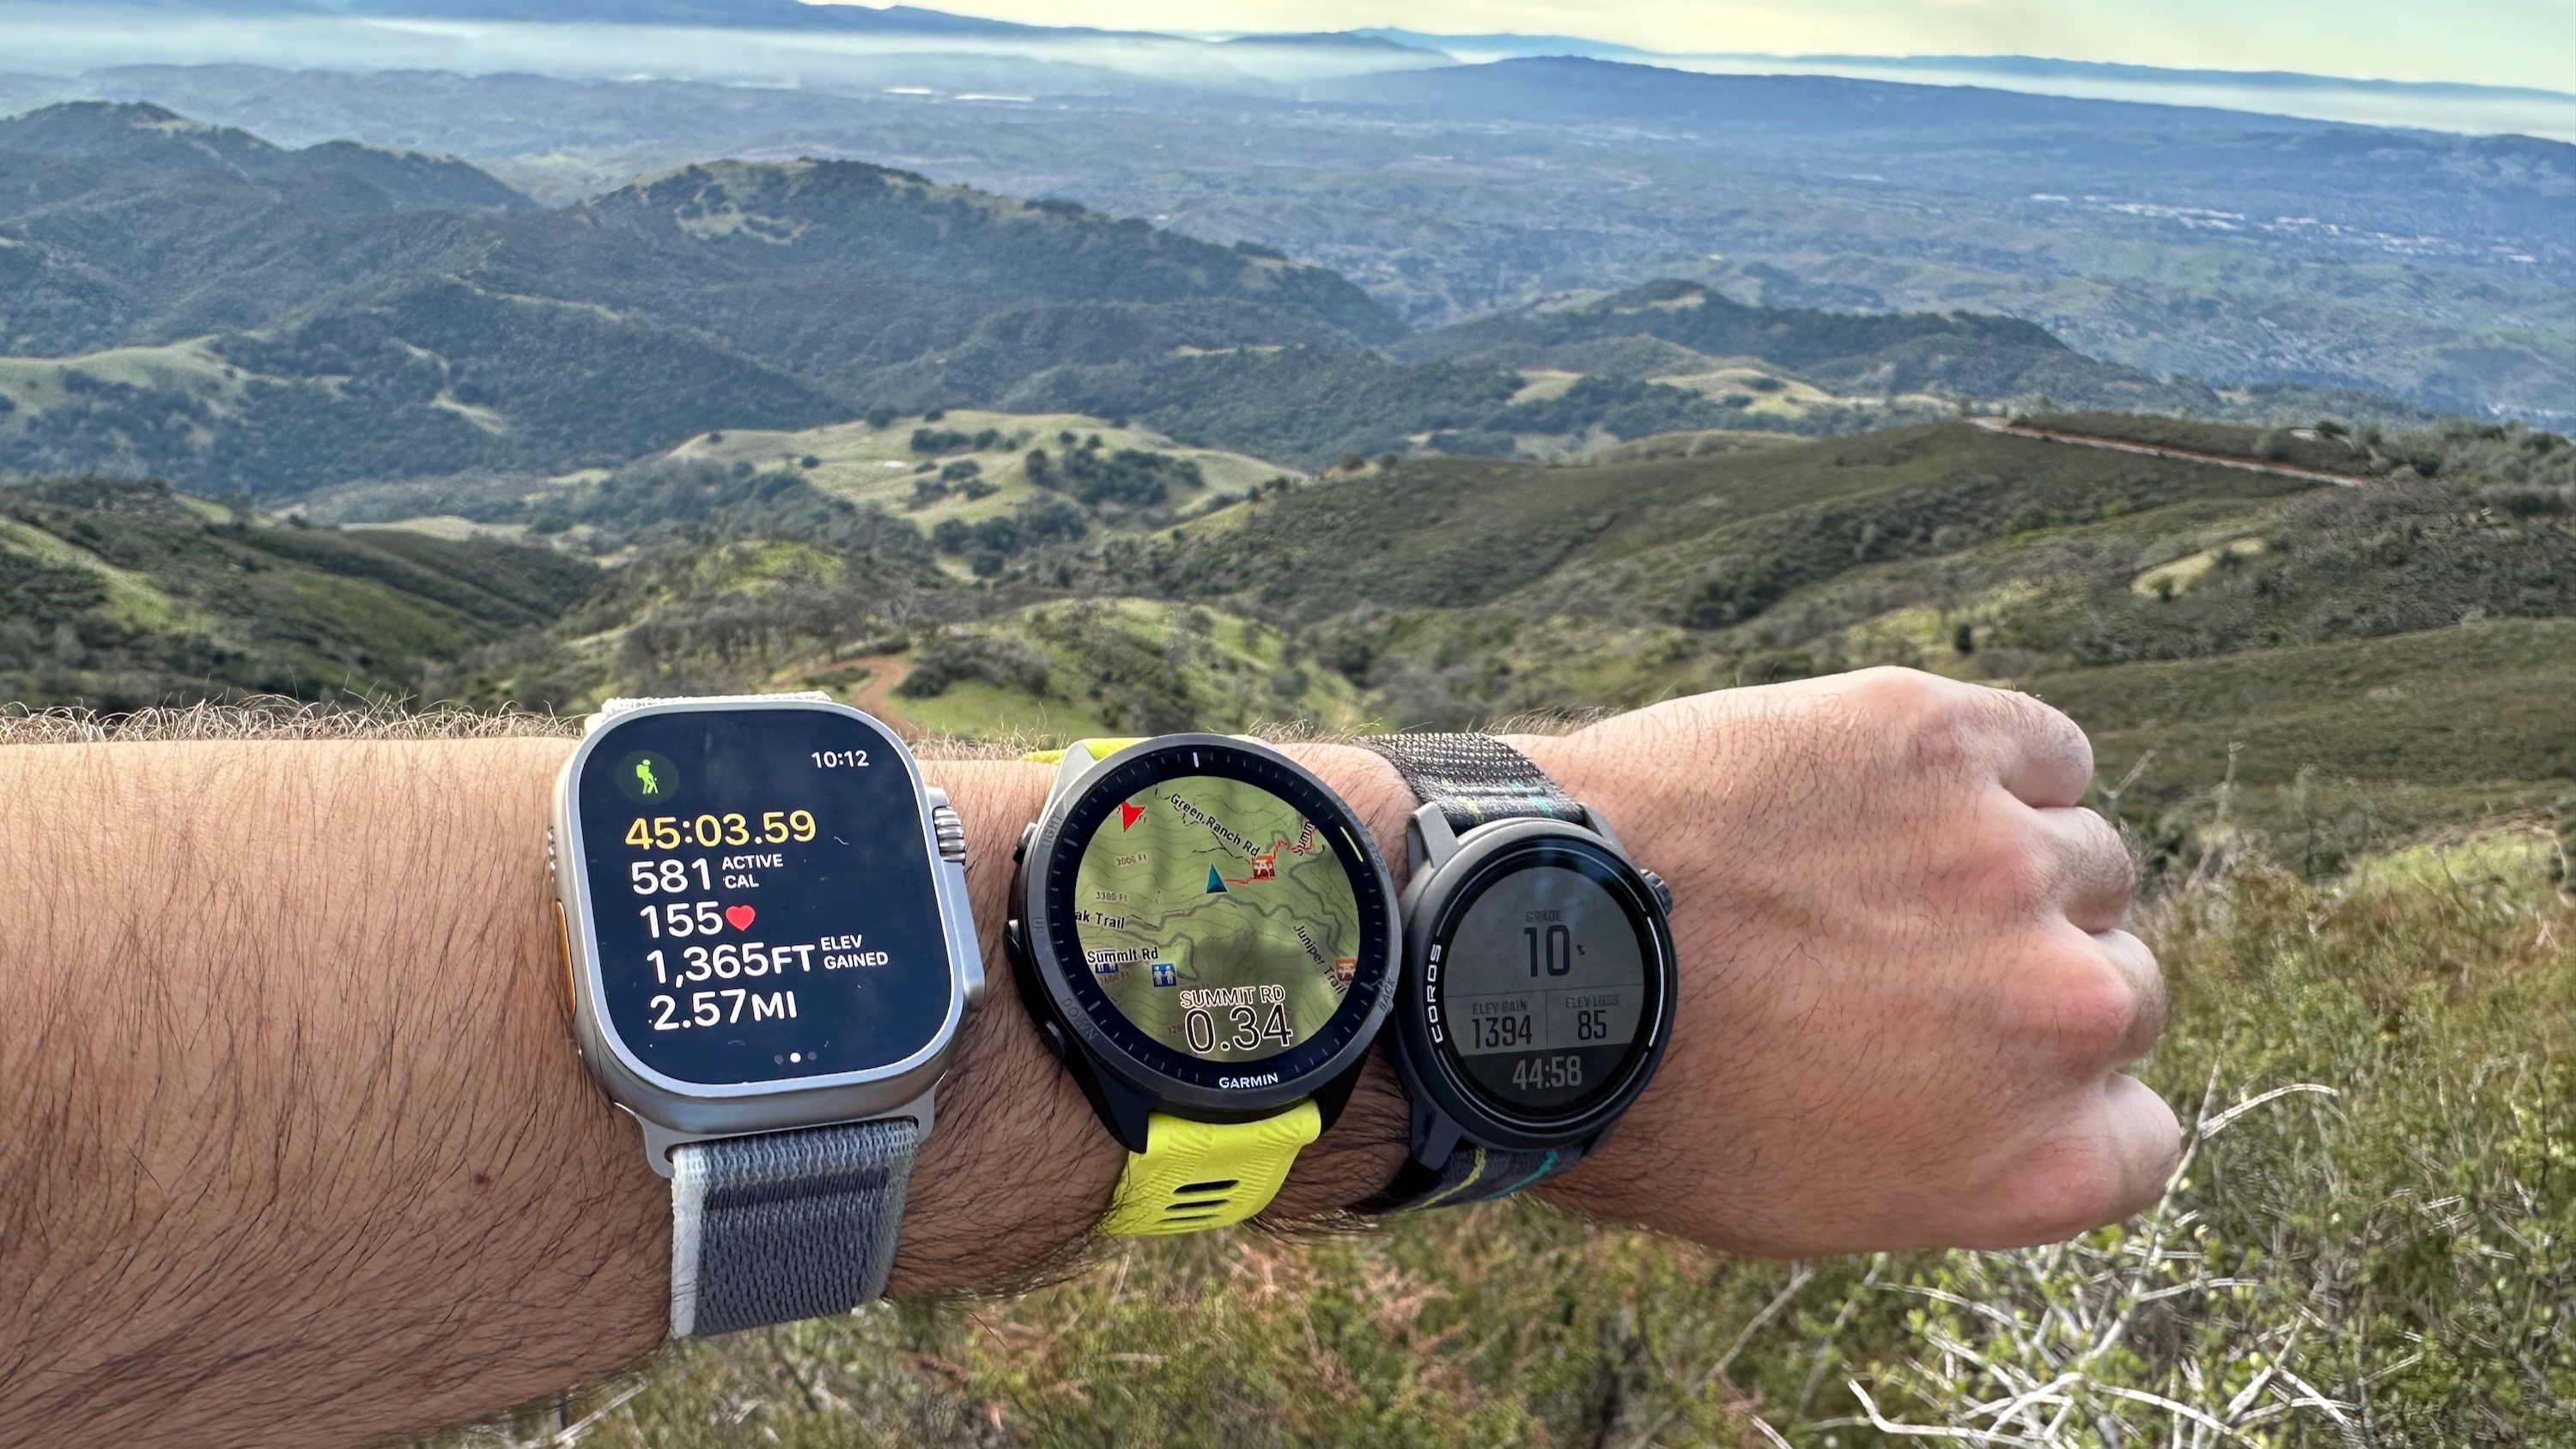 The Apple Watch Ultra 2, Garmin Forerunner 965, and COROS PACE 3 all worn on one wrist on the Mount Diablo Summit Trail, overlooking the valley below.